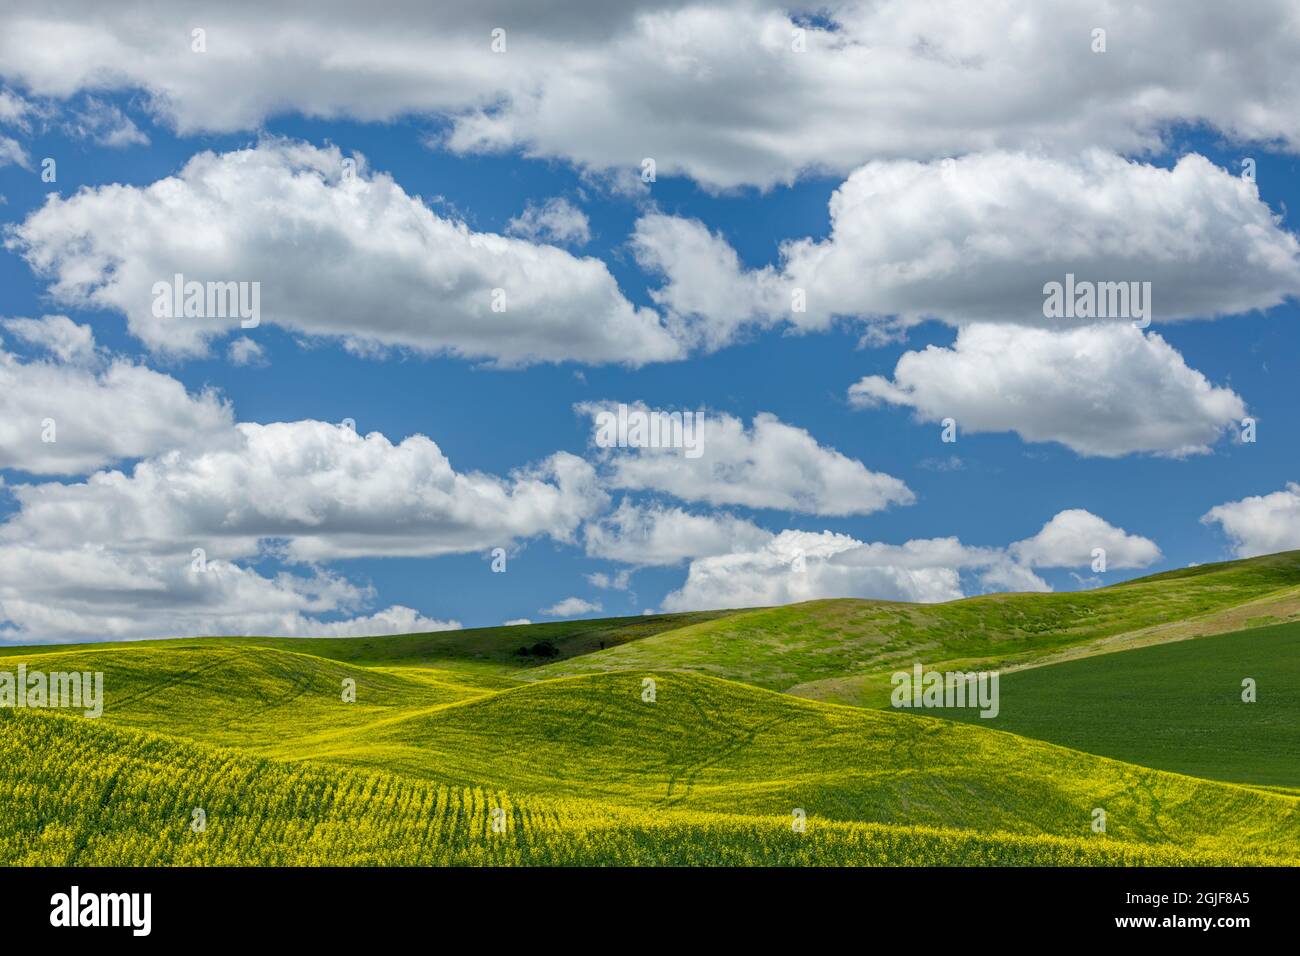 Expansive canola crop on rolling hills and cumulus clouds, Palouse agricultural region of Eastern Washington State. Stock Photo